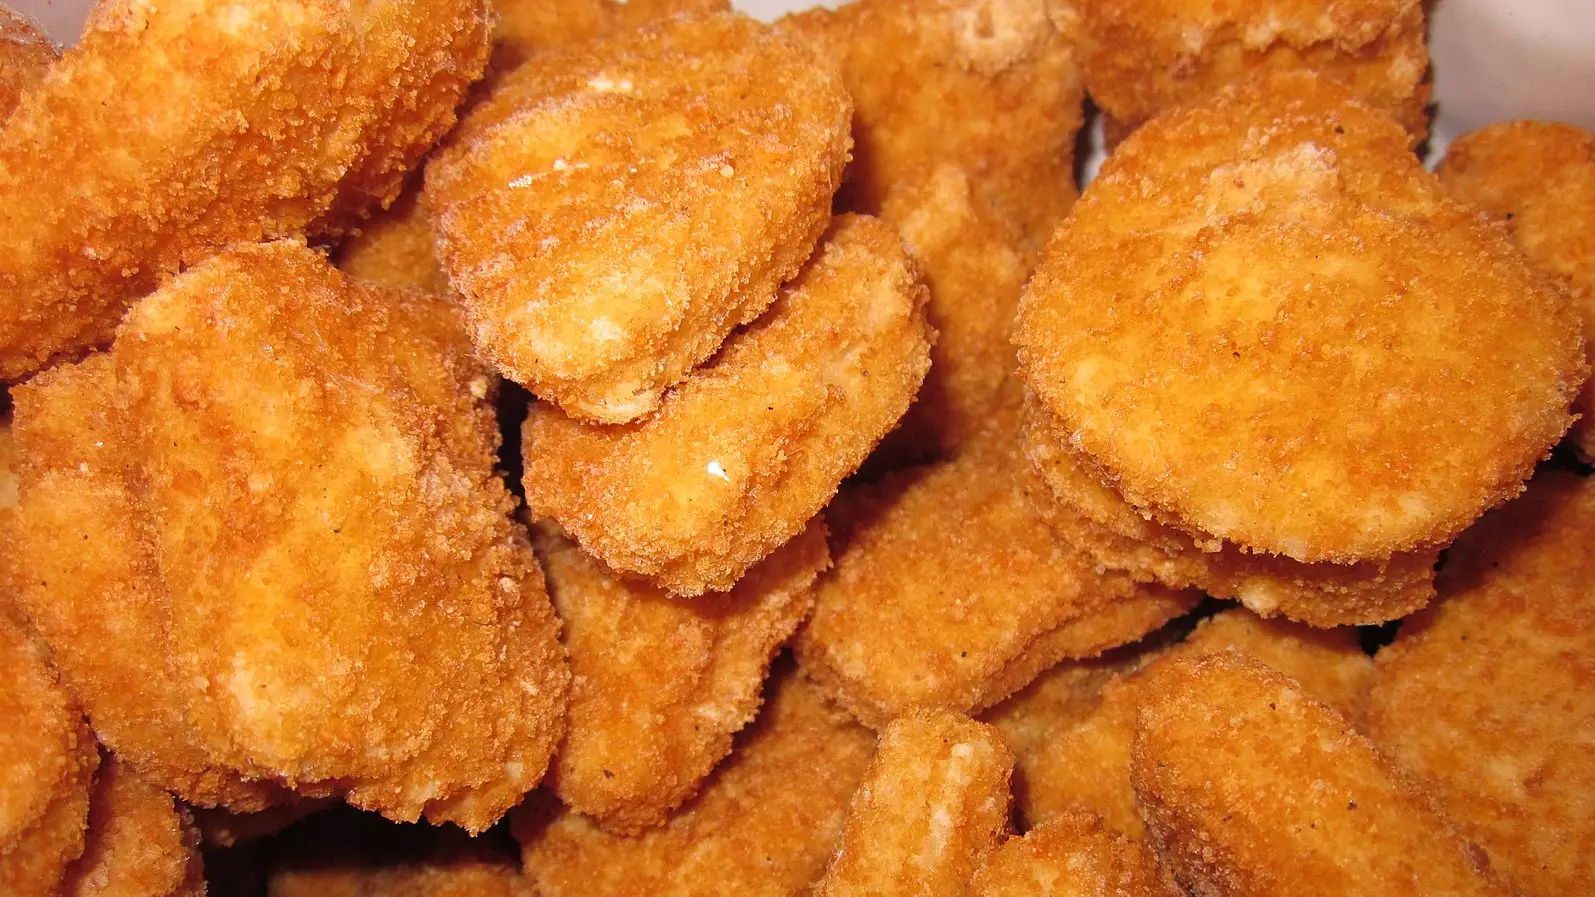 A Chicken Nugget Festival Is Hitting Melbourne This Weekend